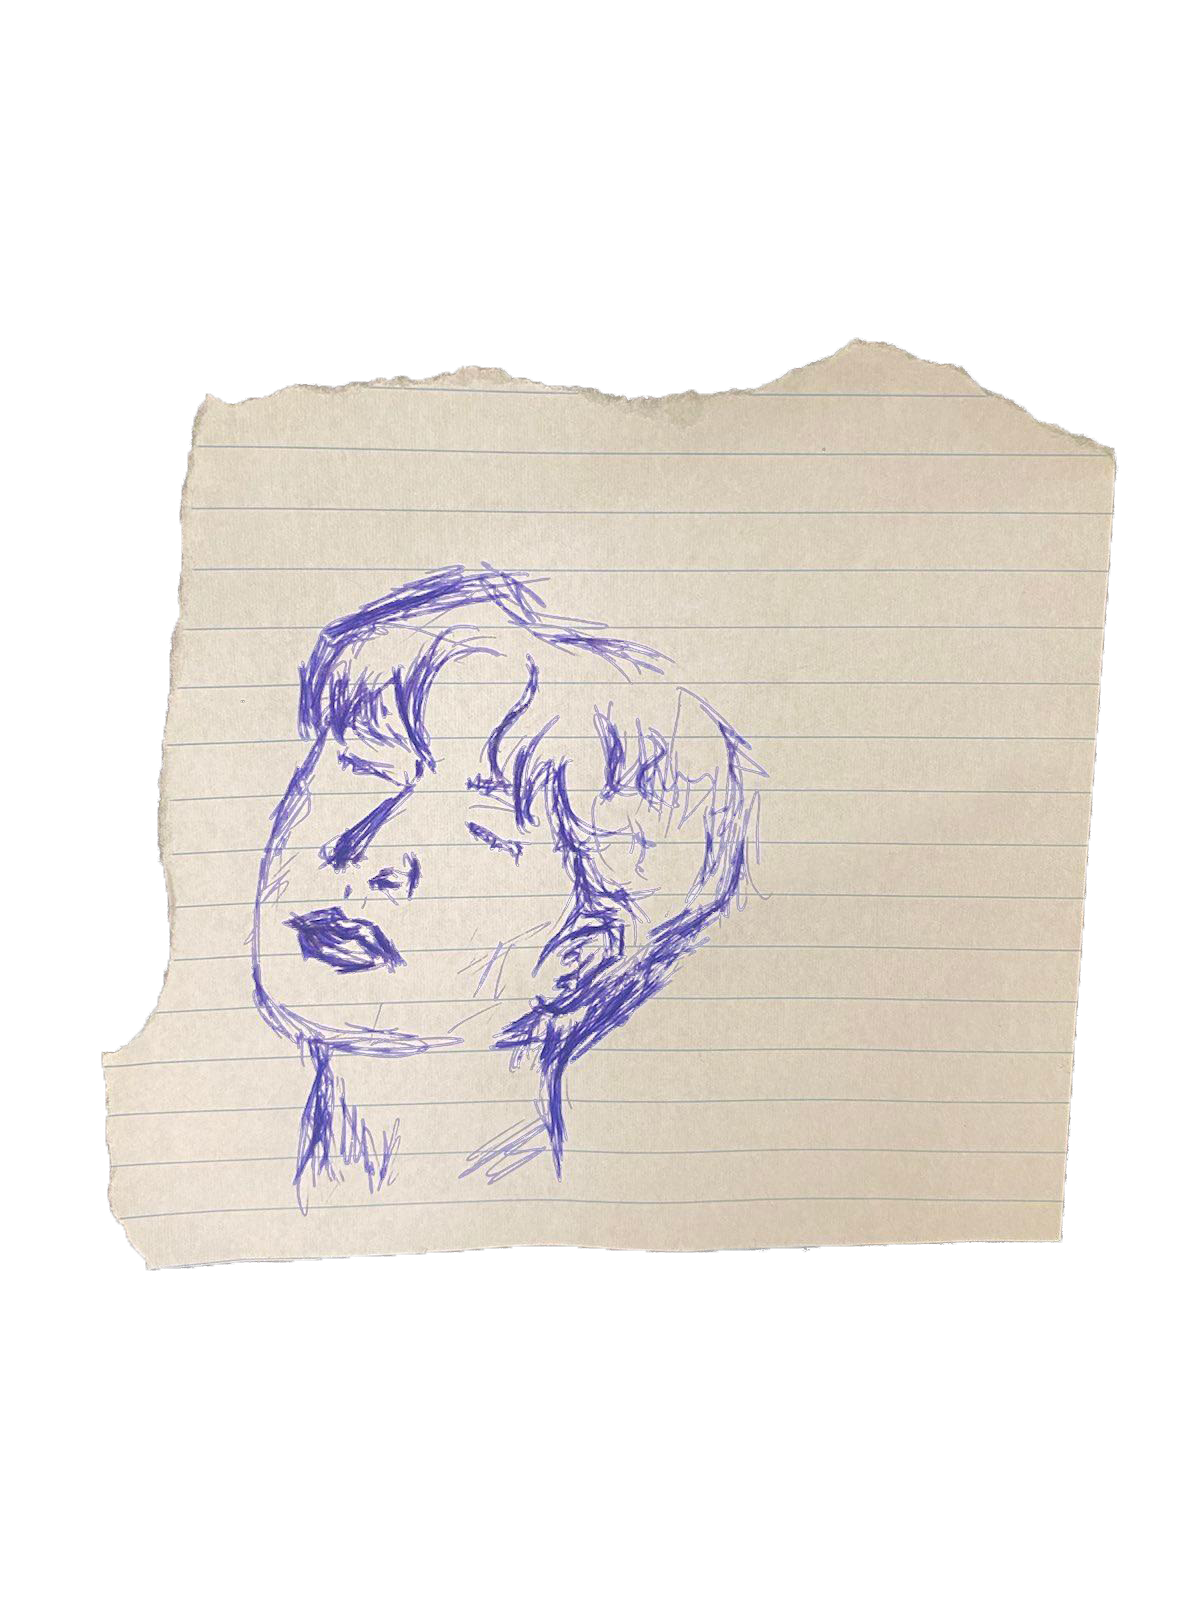 Pen drawing of Jungkook on notebook paper